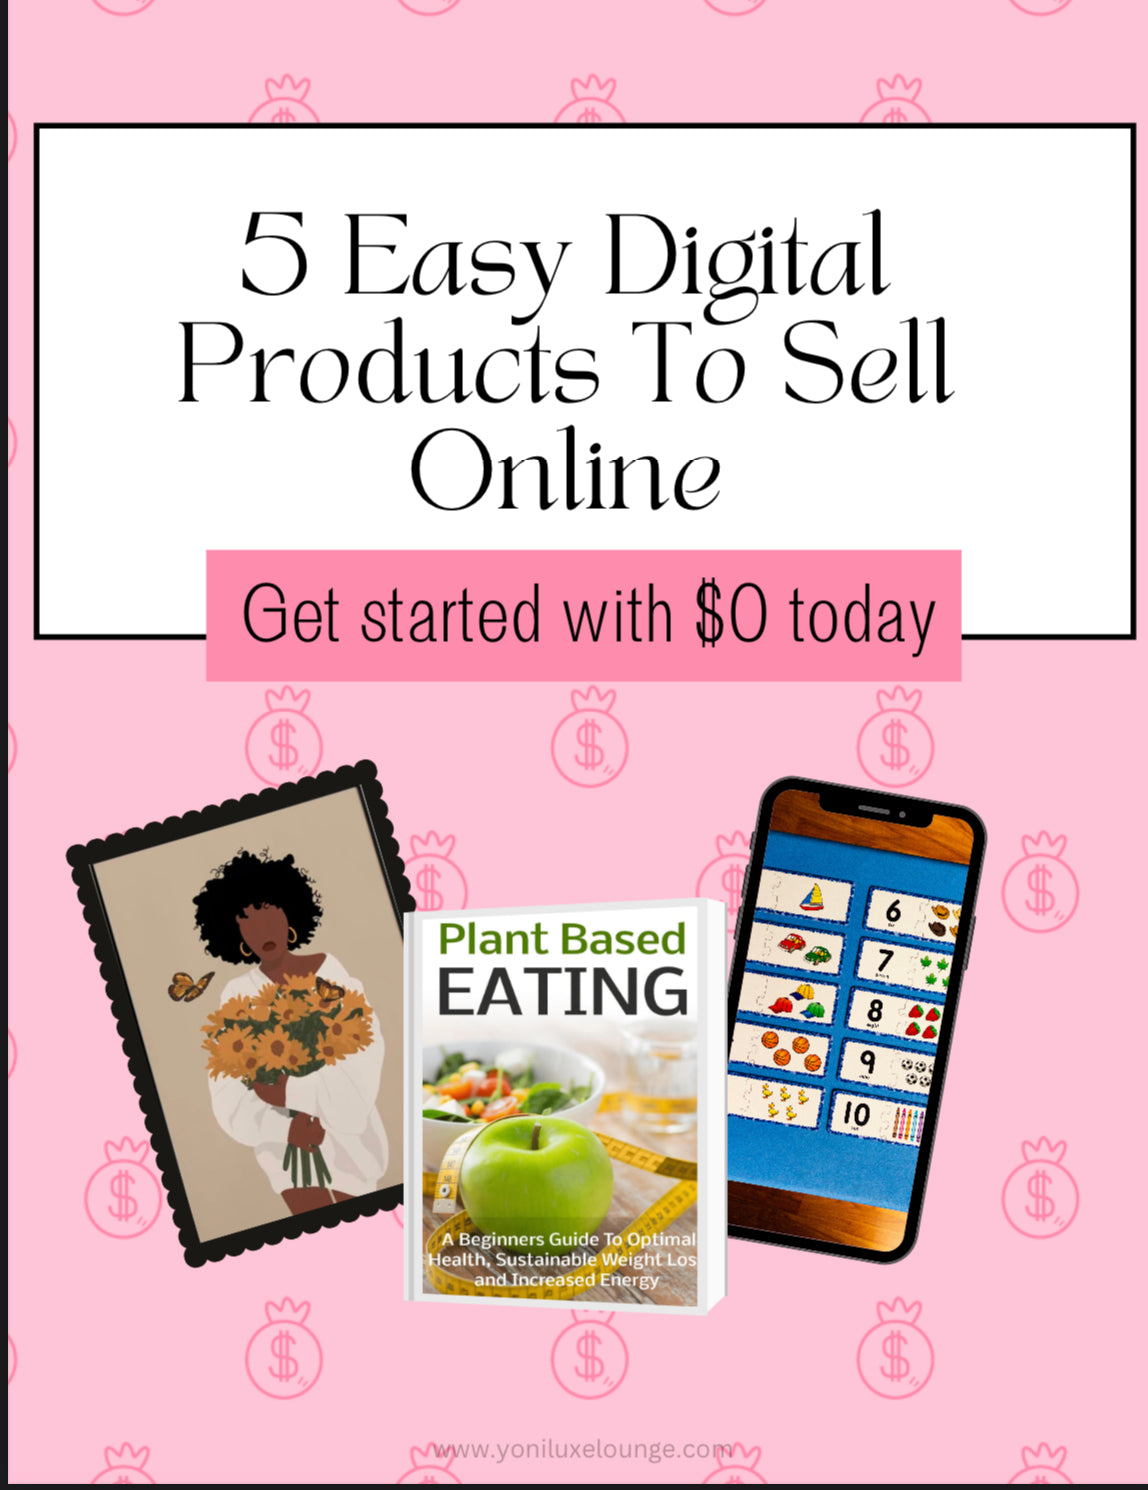 5 Easy Digital Products To Sell Online